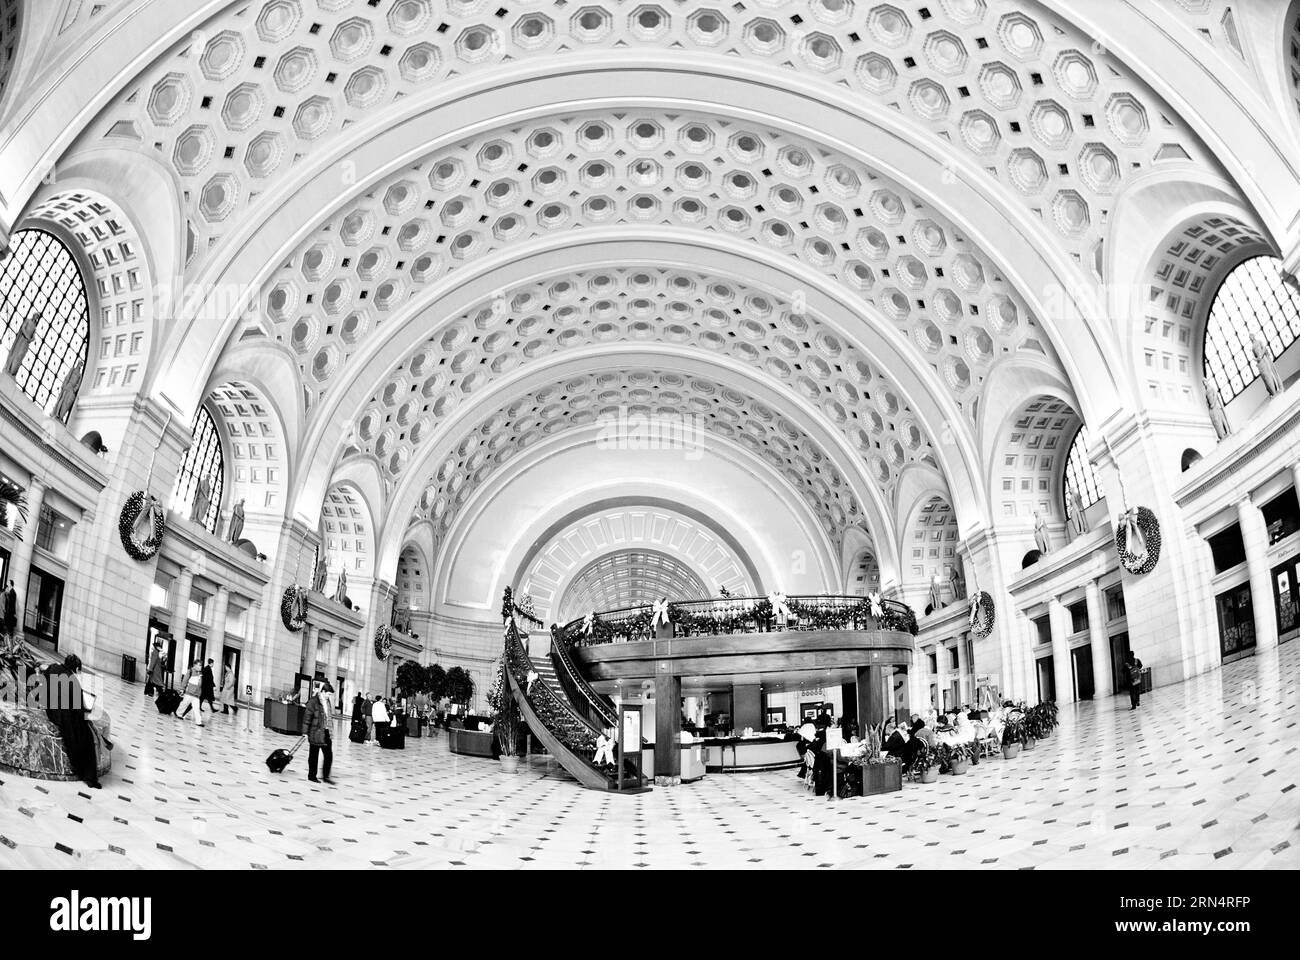 WASHINGTON DC, United States — Union Station, a historic transportation hub and architectural marvel, serves as a bustling gateway for travelers entering and departing the nation's capital. Stock Photo